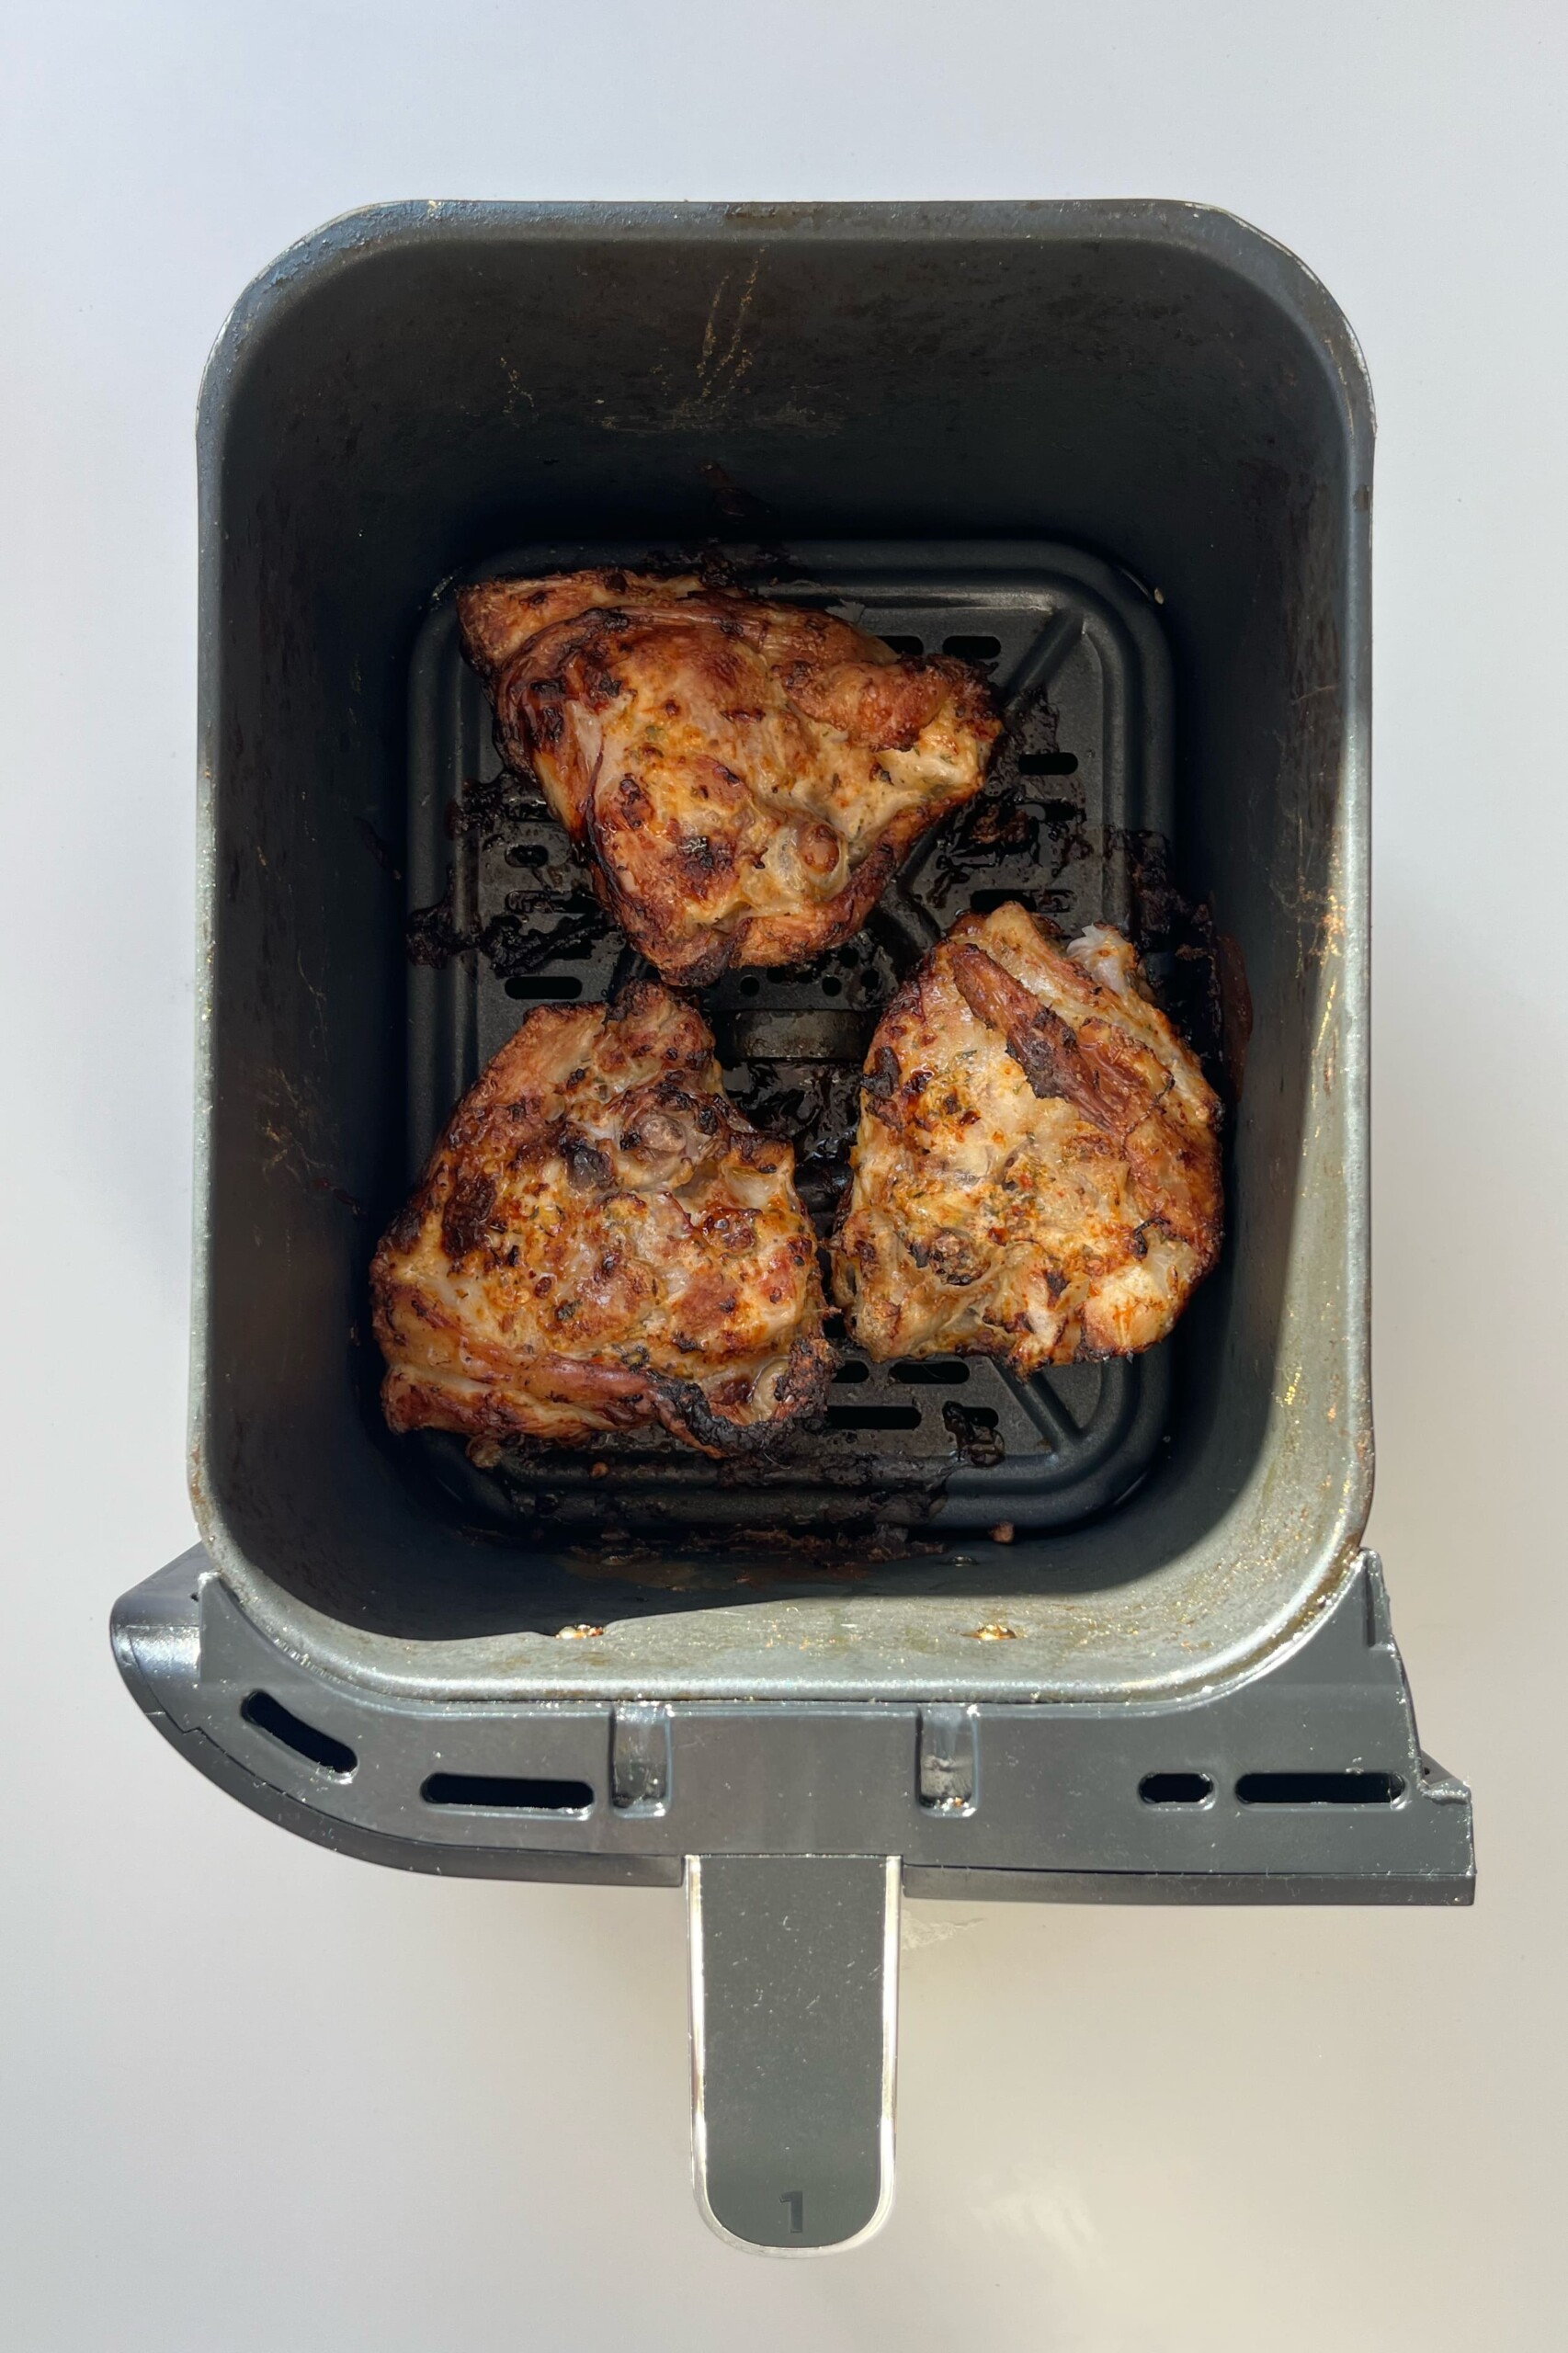 Cooked air fryer chicken in the air fryer compartment.